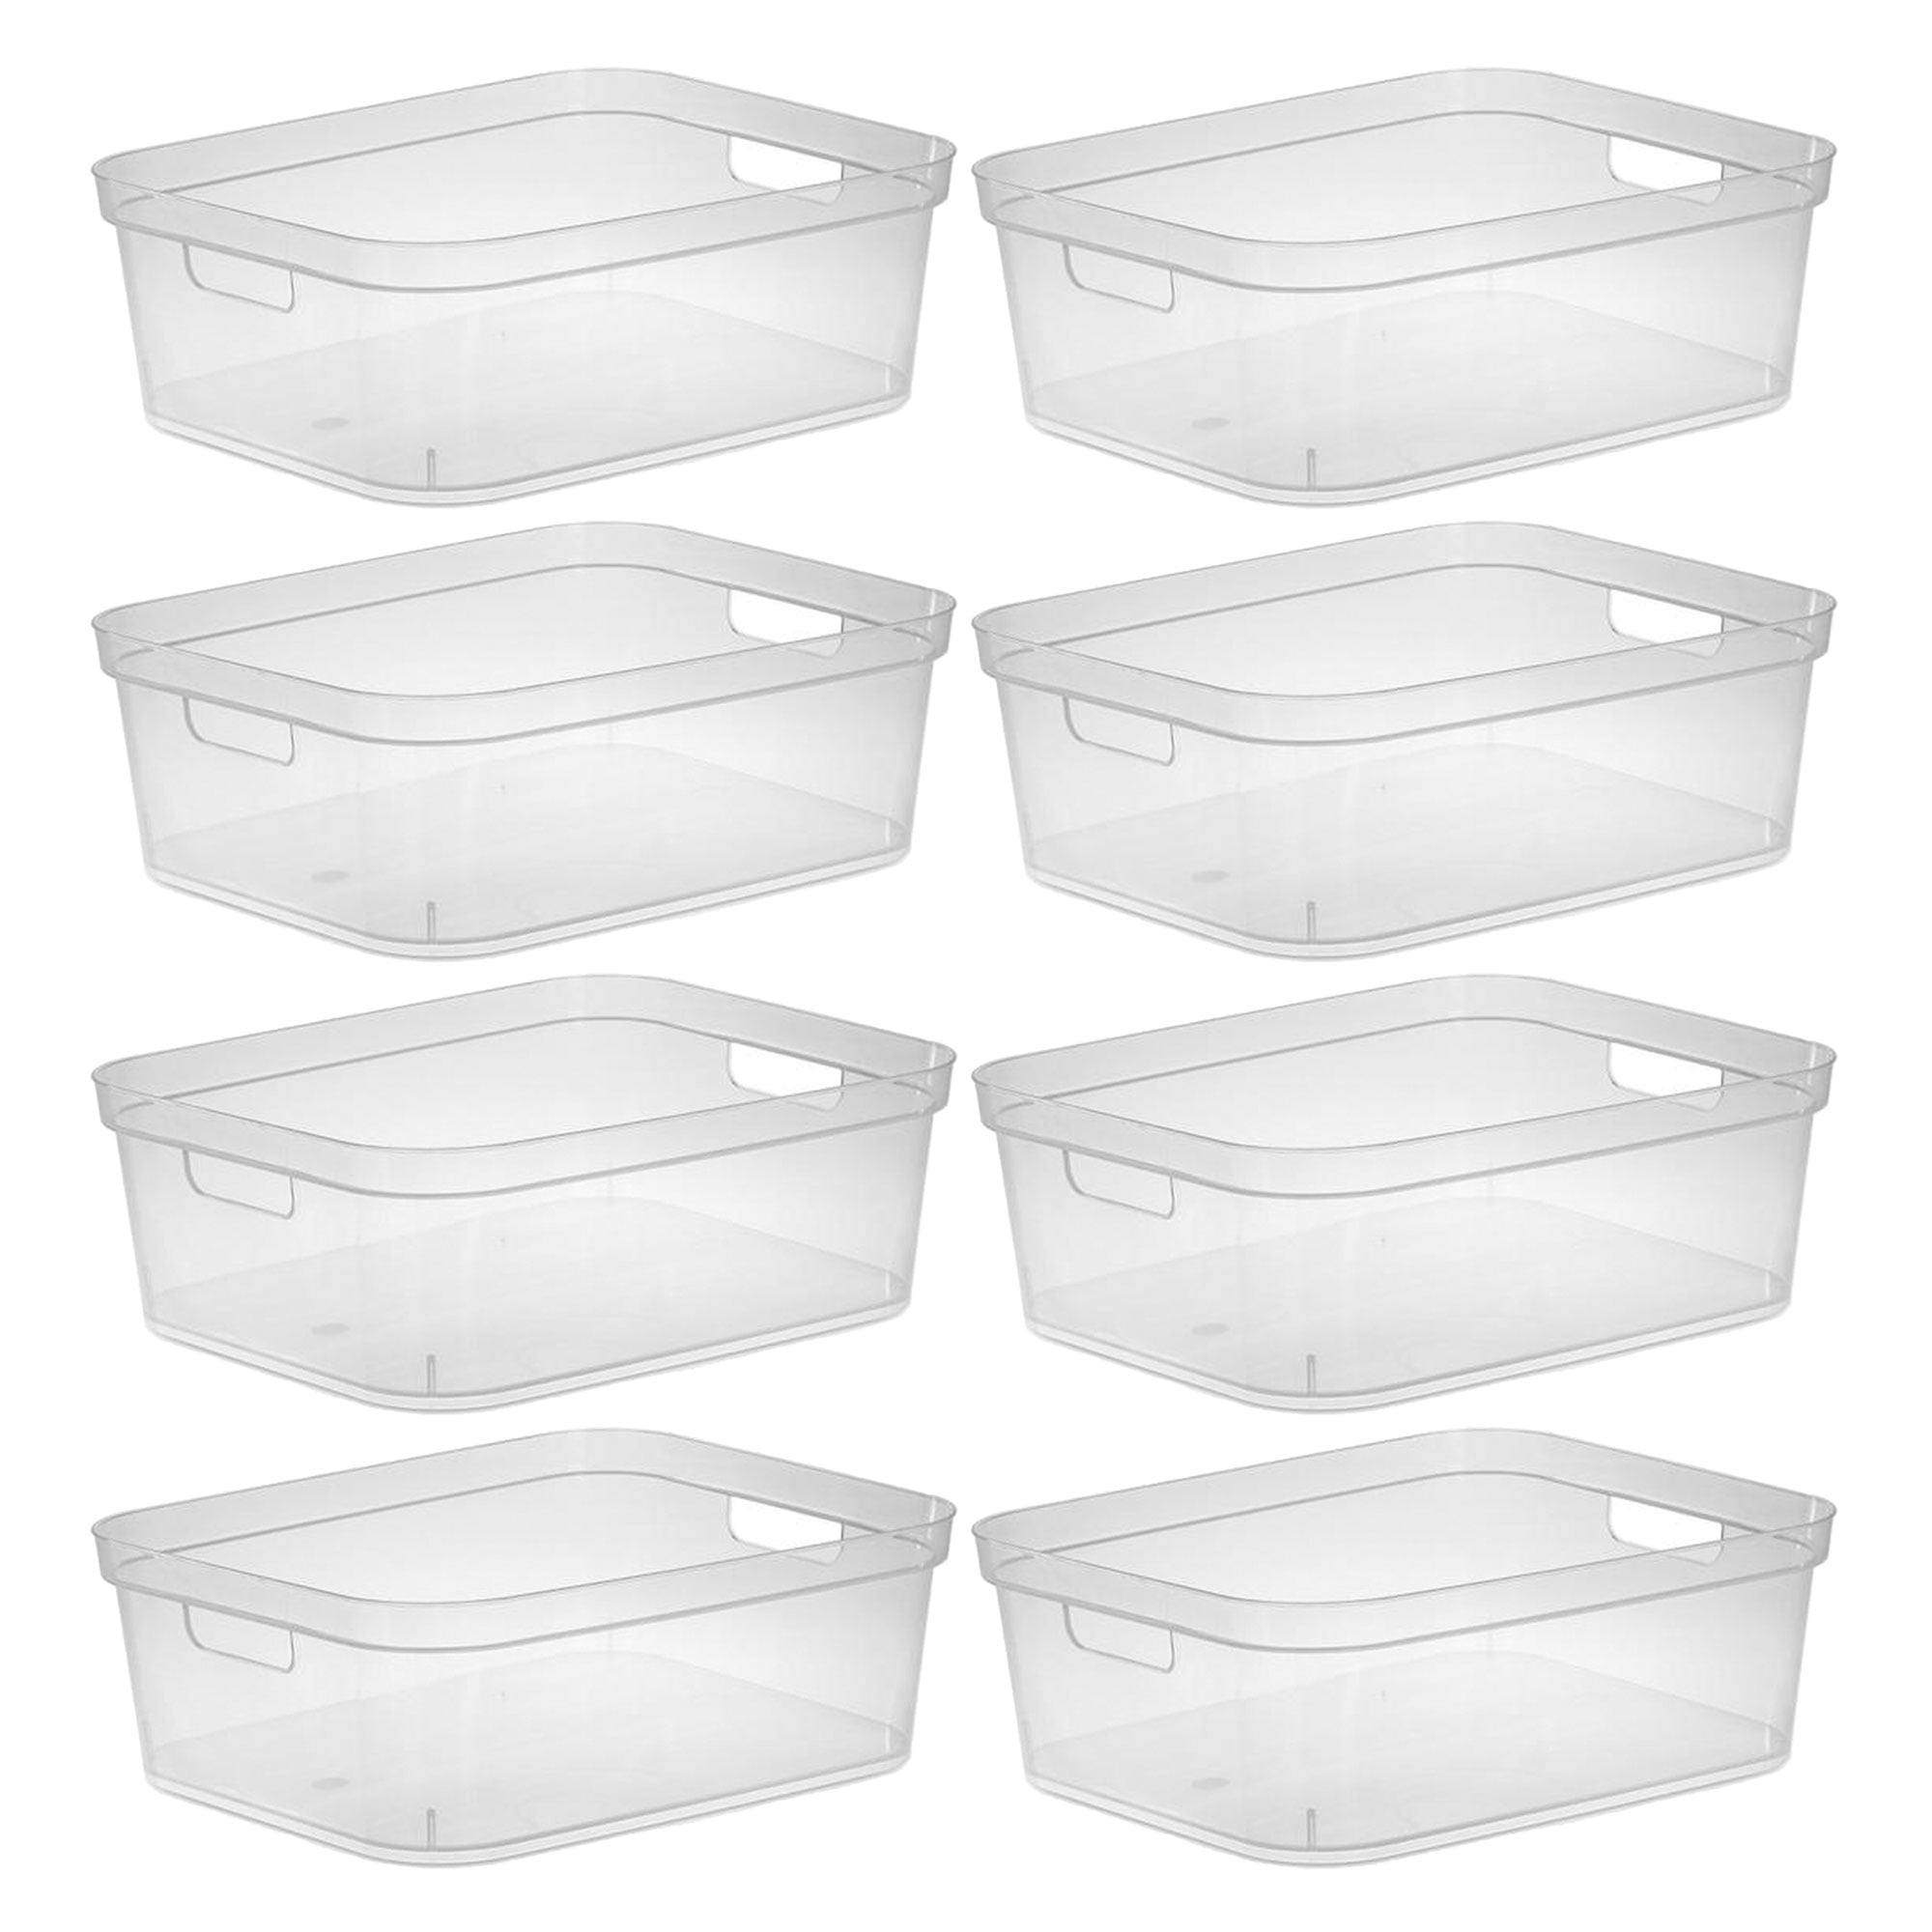 Azar Displays 11.25 in. W x 7.5 in. D x 5 in. H Large Storage Tote Bins  with Handle Clear Color (Pack of 4) 556237 - The Home Depot